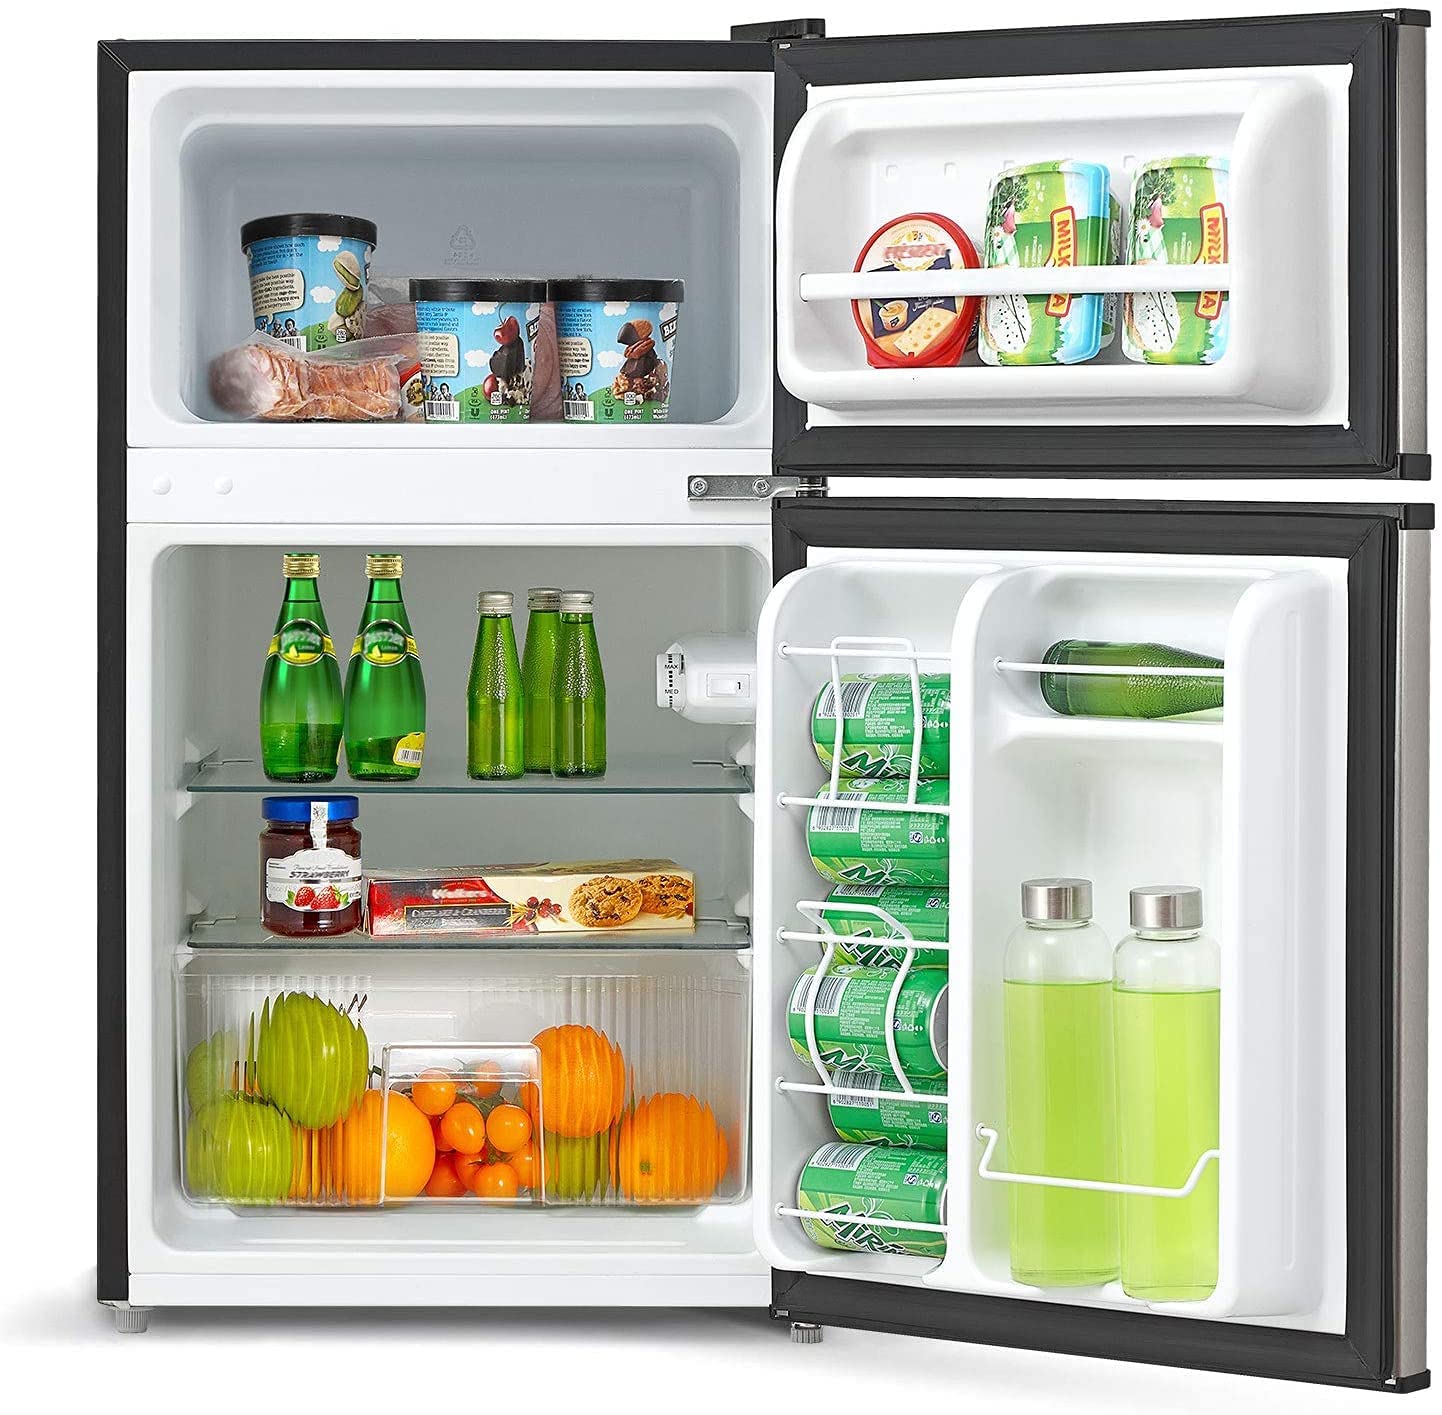 Megmeet Adjustable Temperature Ranges Compact Refrigerator Stainless Steel with easy-to-clean interior